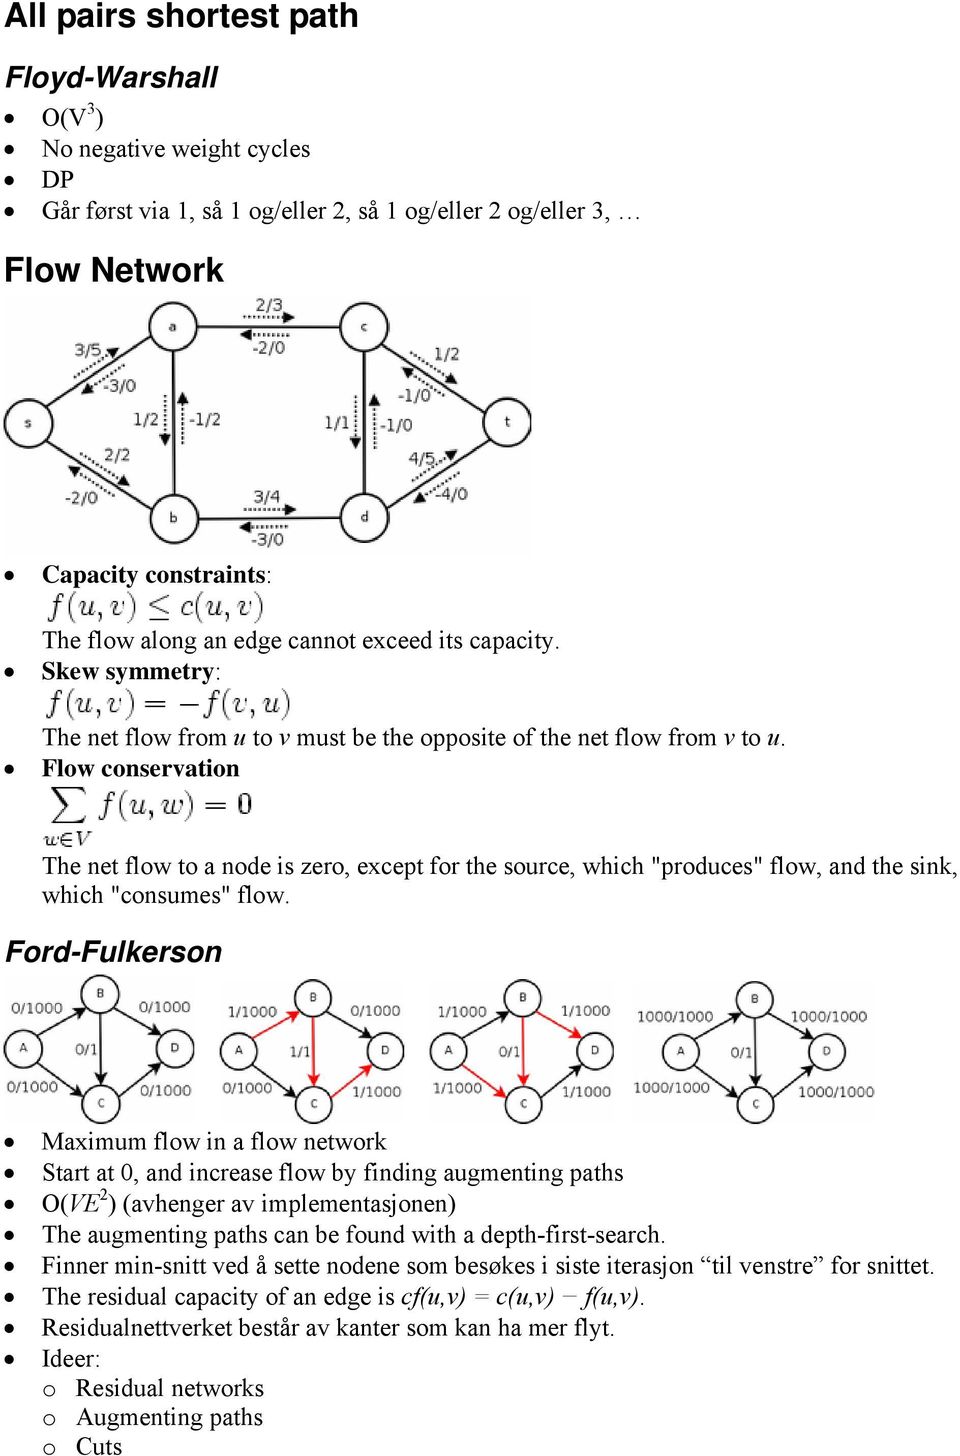 Flow conservation The net flow to a node is zero, except for the source, which "produces" flow, and the sink, which "consumes" flow.